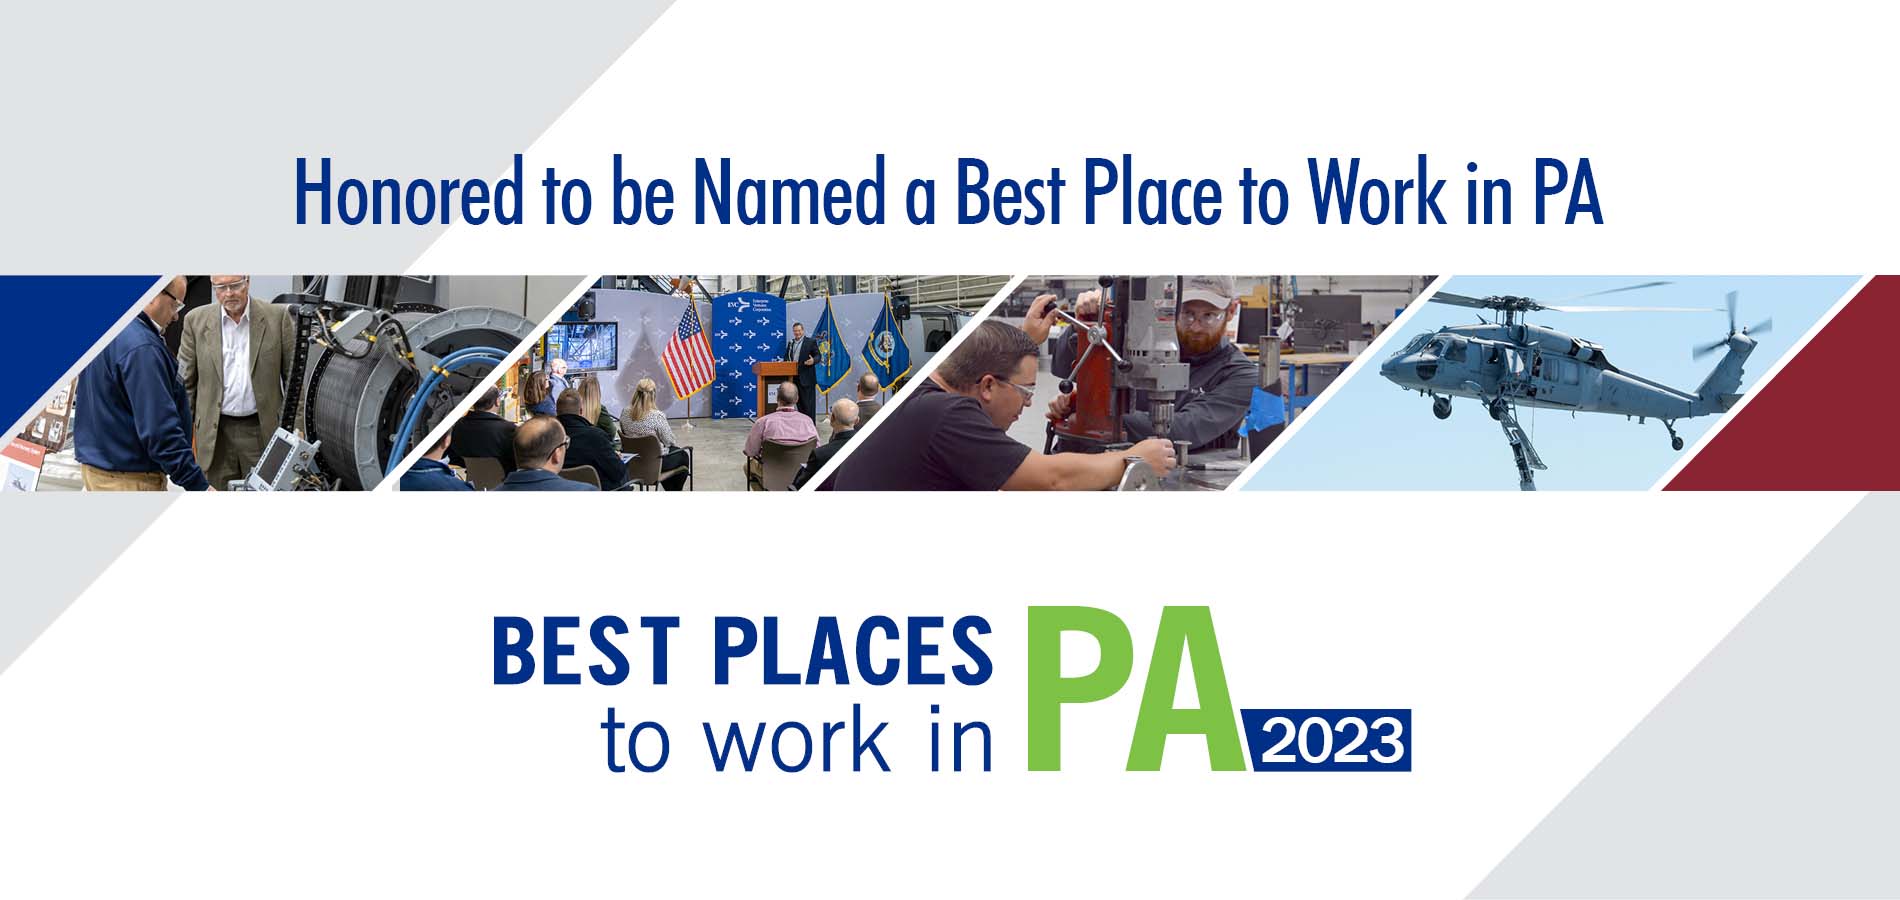 Honored to be Named a Best Place to Work in PA, Best Places to Work in PA 2023